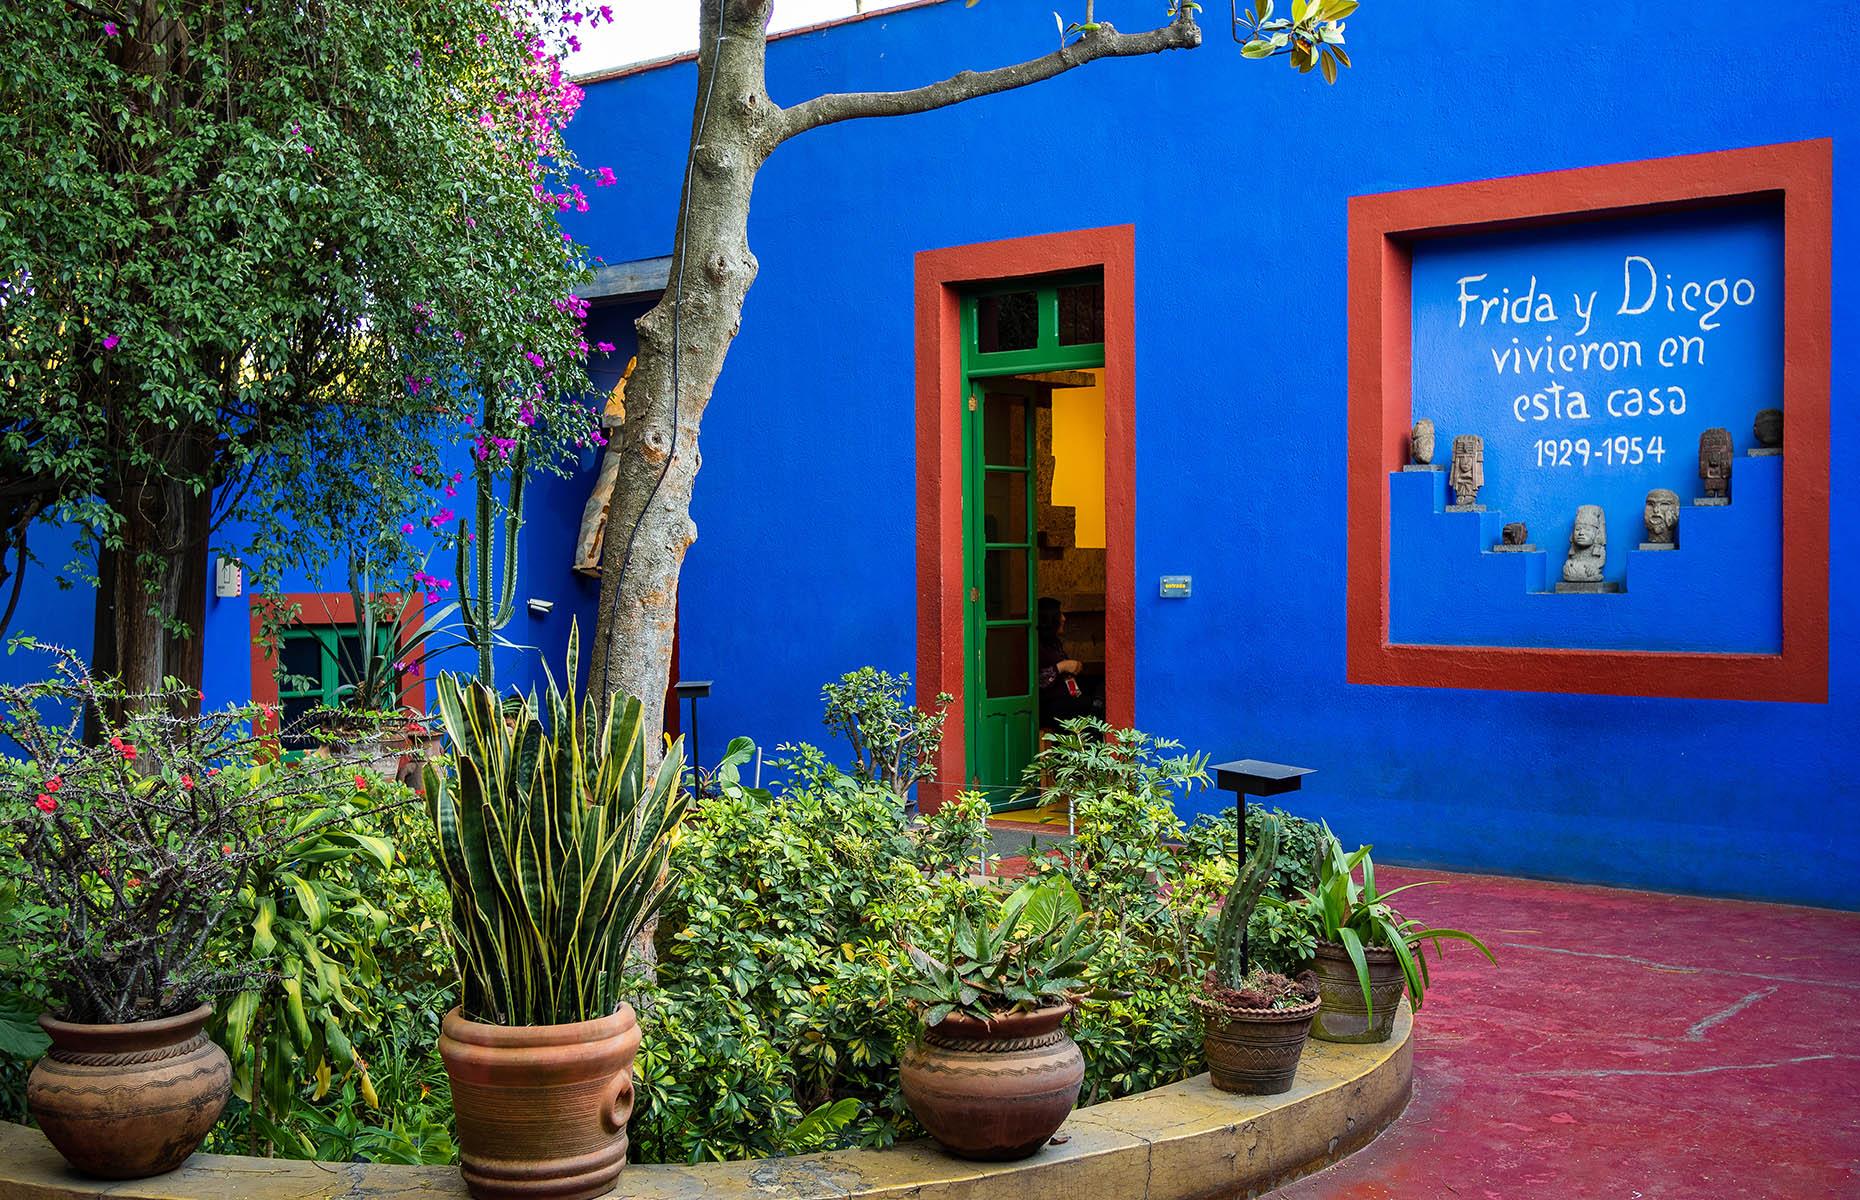 <p>One of the best cities in the world for culture, there are new galleries, exhibitions and emerging art spaces opening regularly in the Mexican metropolis. However, the Frida Kahlo Museum, aka the Blue House, in the Colonia del Carmen neighbourhood of Coyoacan is still one of the main draws. Any local, or regular visitor, will tell you that the best time to go to Mexico City is between March and May when the city’s parks are in full bloom, and people are out and about enjoying the warm days and cool nights.</p>